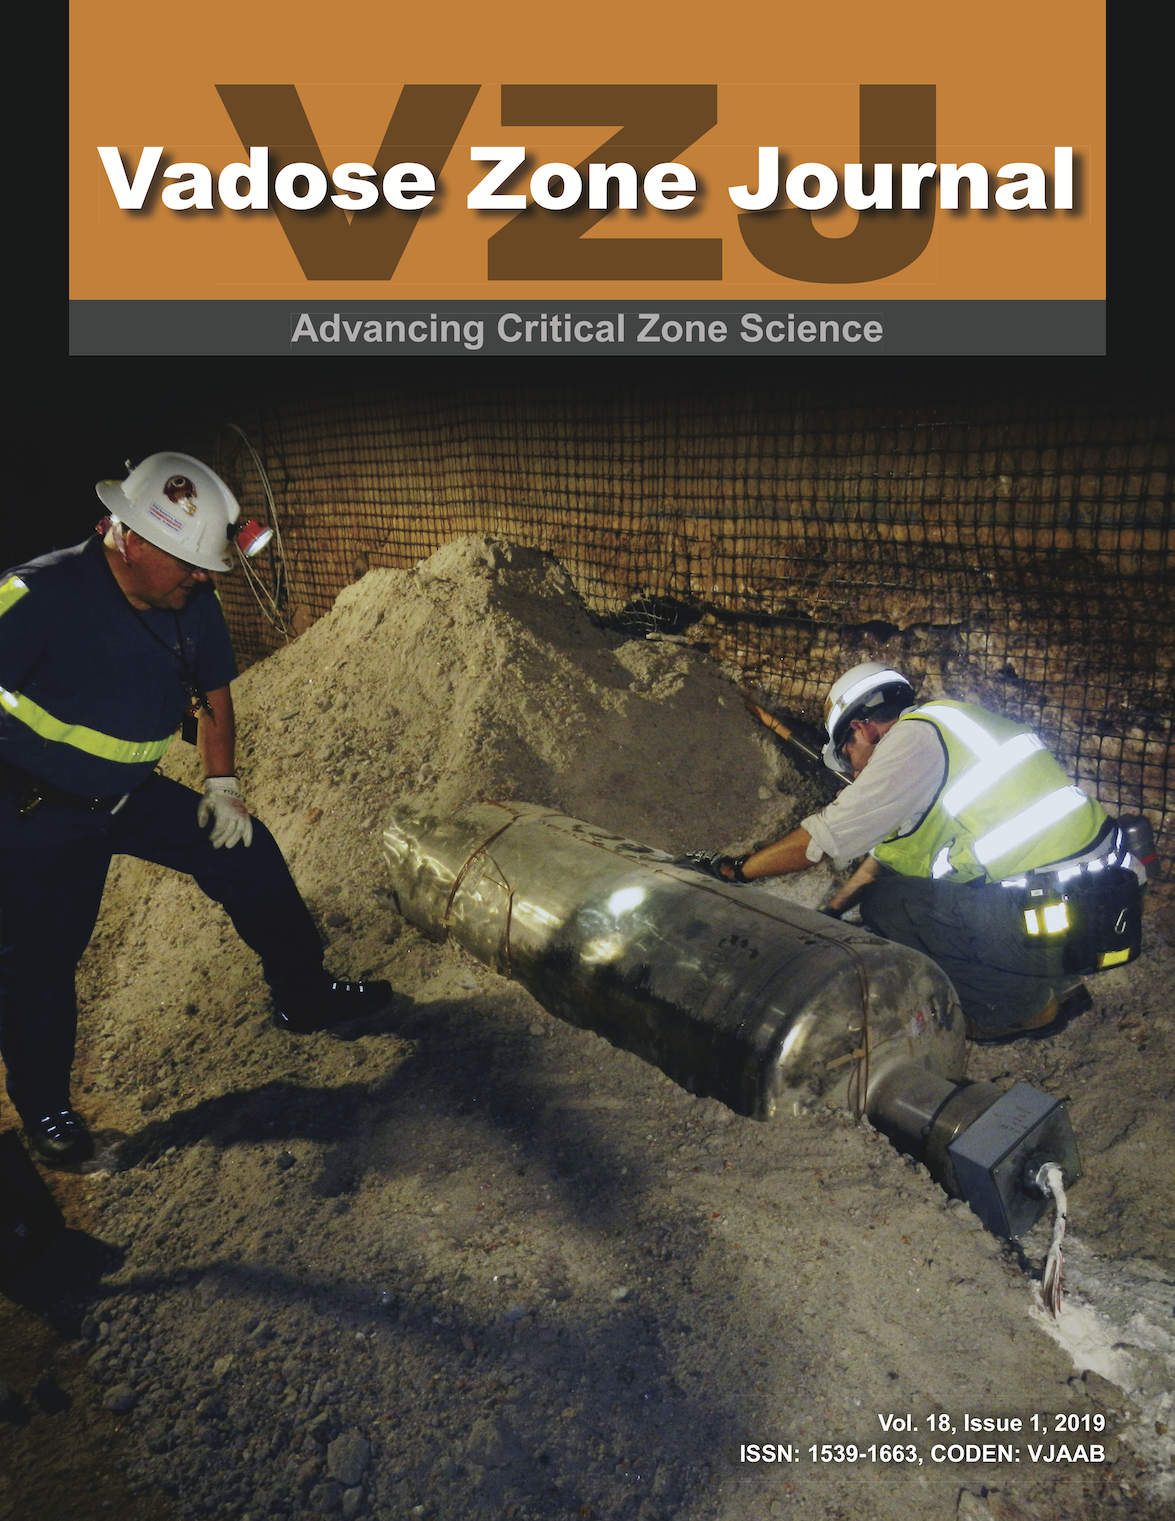 Vadose Zone Cover #2